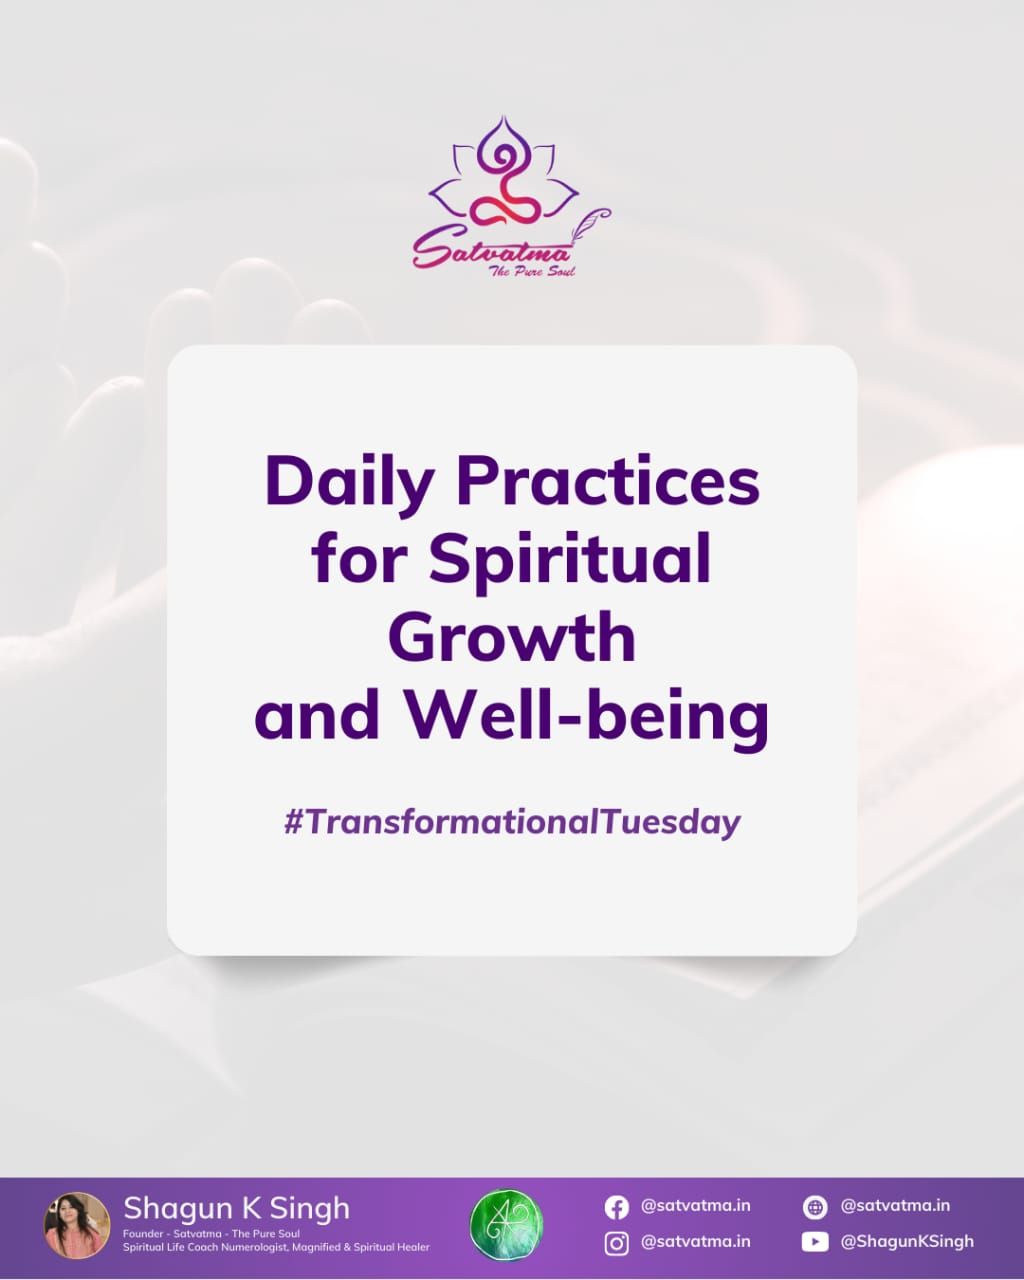 Daily Practices for Spiritual Growth and Well-being. 

Here is a list of things that one should do every day:

1. Set aside dedicated time and space for yourself (at home or in any quiet or religious place).
2. Start living a spiritually disciplined life as part of your routine.
3. Read something good every day or learn something new.
4. Include mantra chanting in your daily routine.
5. Take responsibility for making at least one person smile, happy, or helping them every day.
6. Include charity as a daily routine (decide on a particular amount that you can spend monthly and divide it by 30 so that small efforts of giving can become part of your life every day).
7. Meditate for 15 minutes daily in the morning.
8. Visit any religious place at least once a week regularly.
9. Invest in yourself and start practicing spirituality, healing, releasing, and so on.

Shagun K Singh
Spiritual Life Coach
Satvatma-The Pure Soul
Manifesting Miracles

# # # 